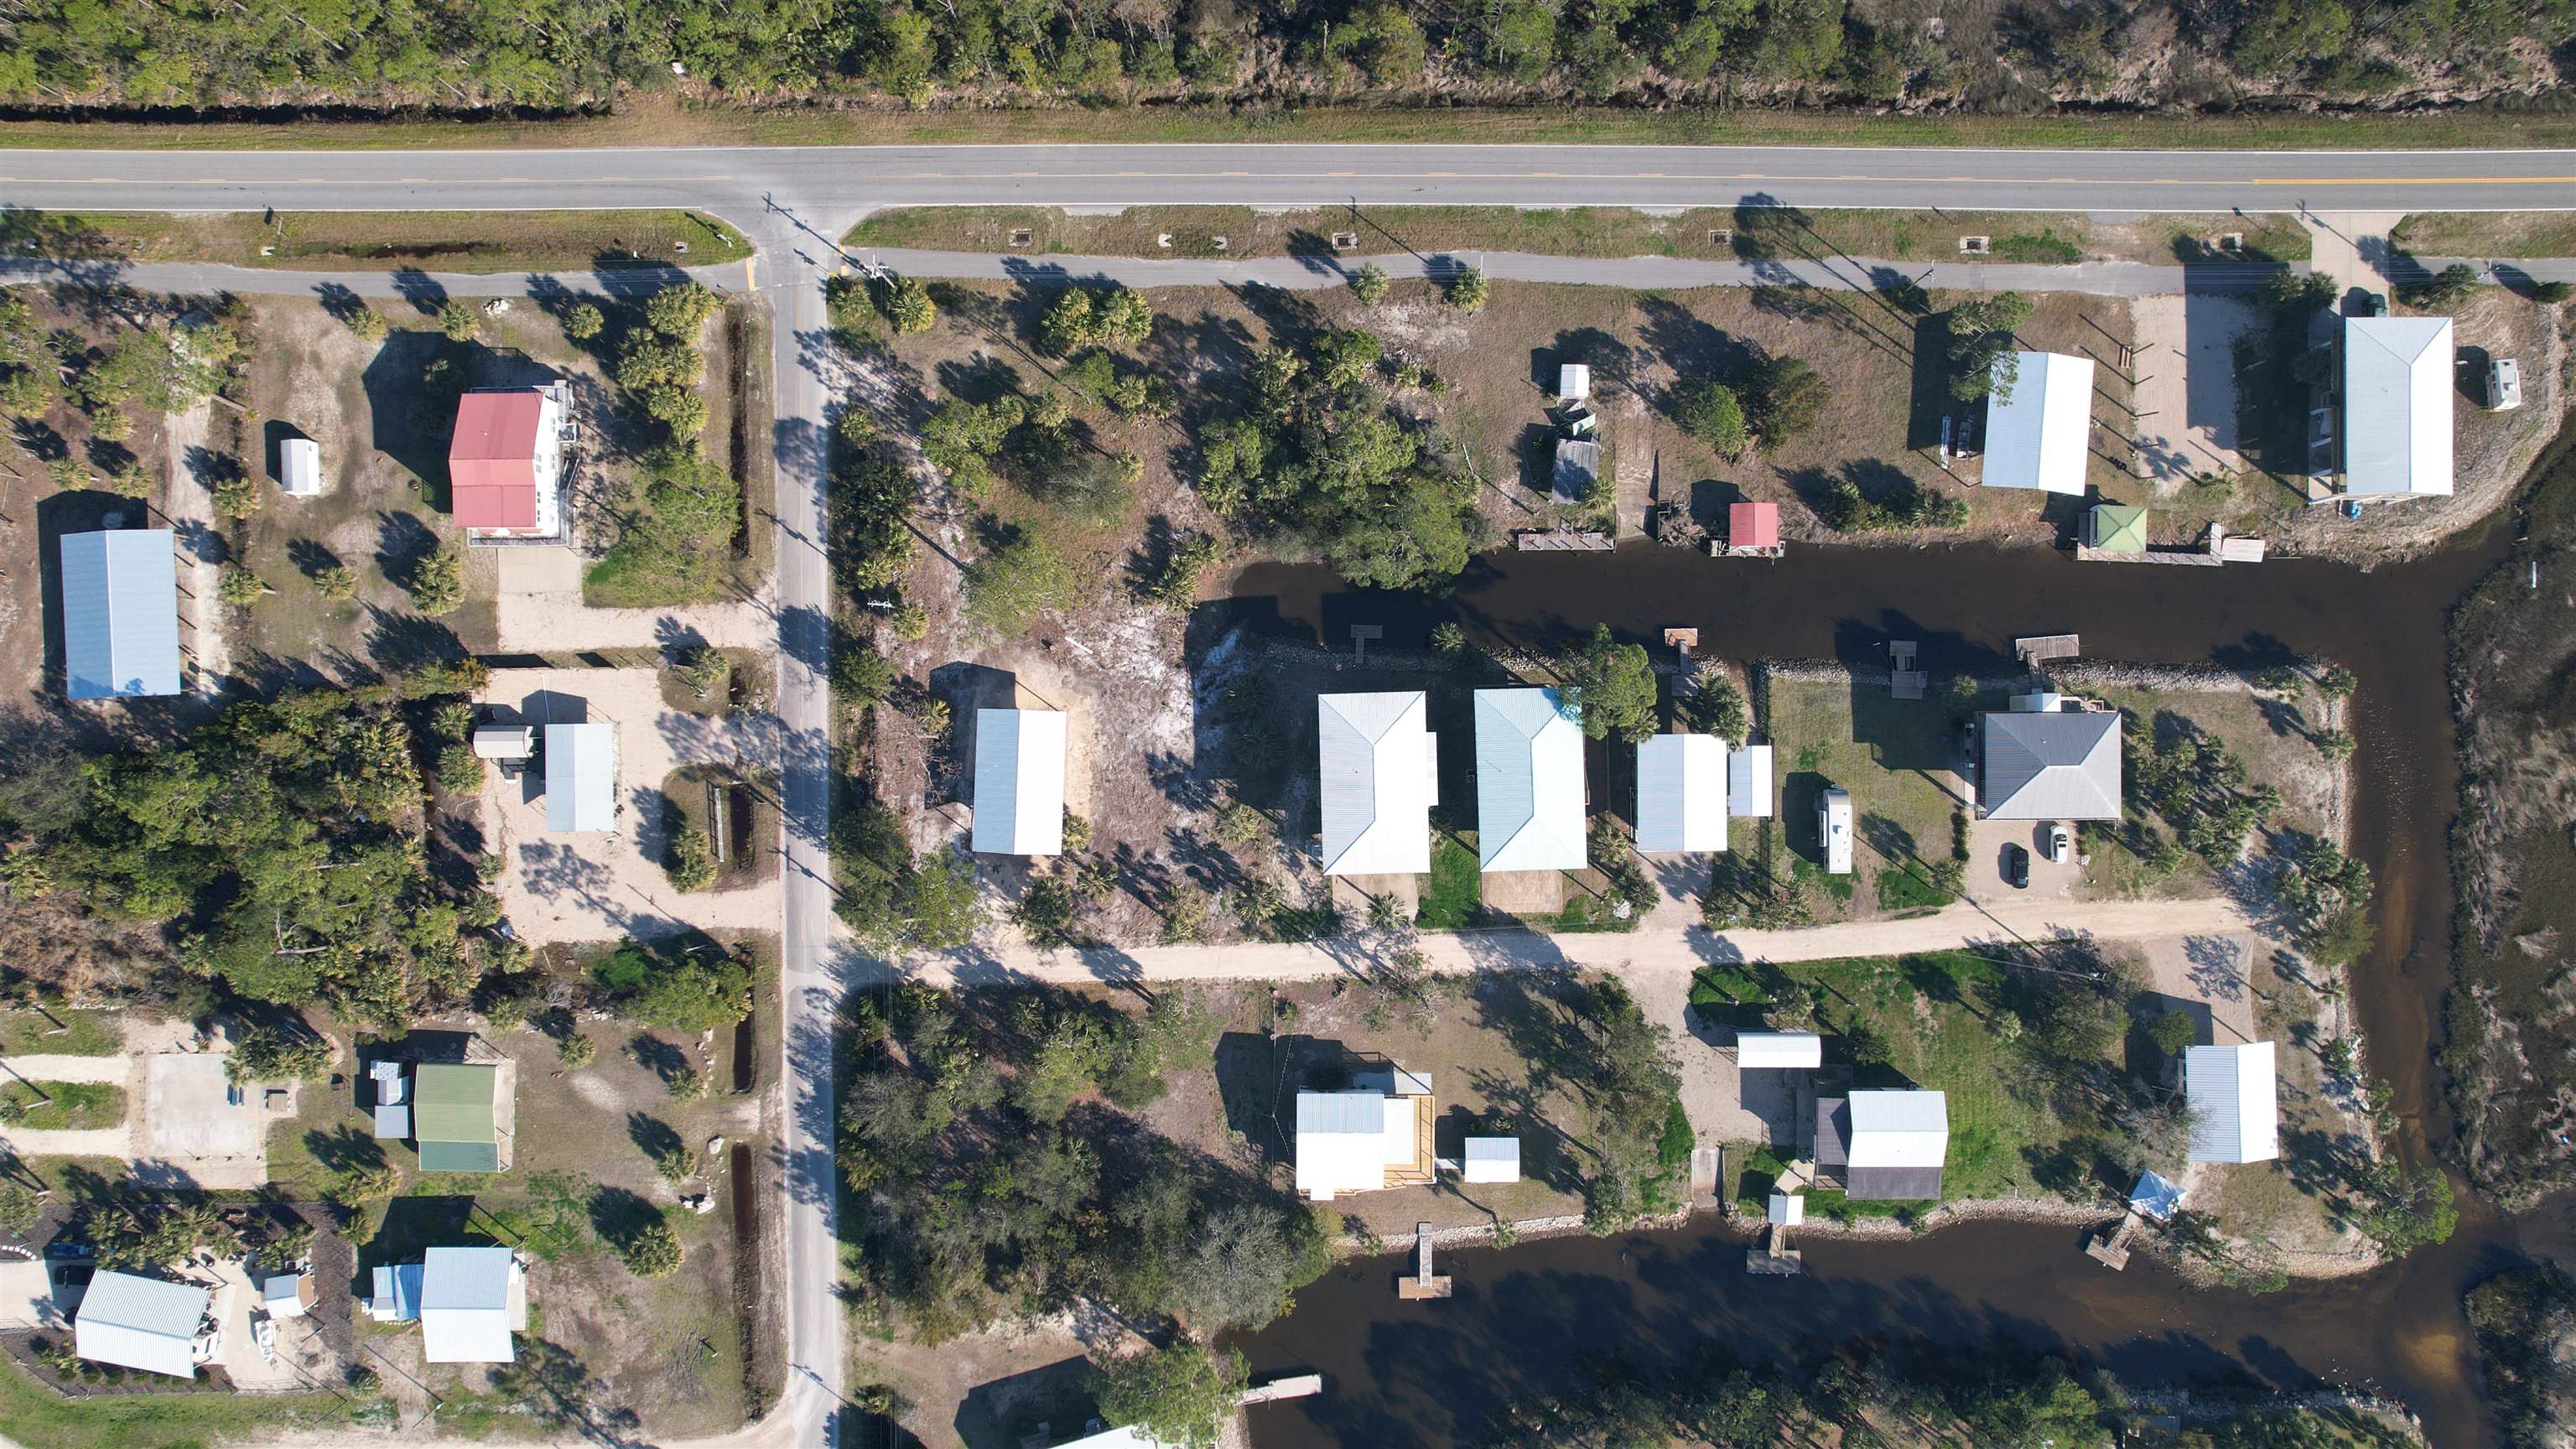 21460 Osprey,PERRY,Florida 32348,Lots and land,Osprey,368385